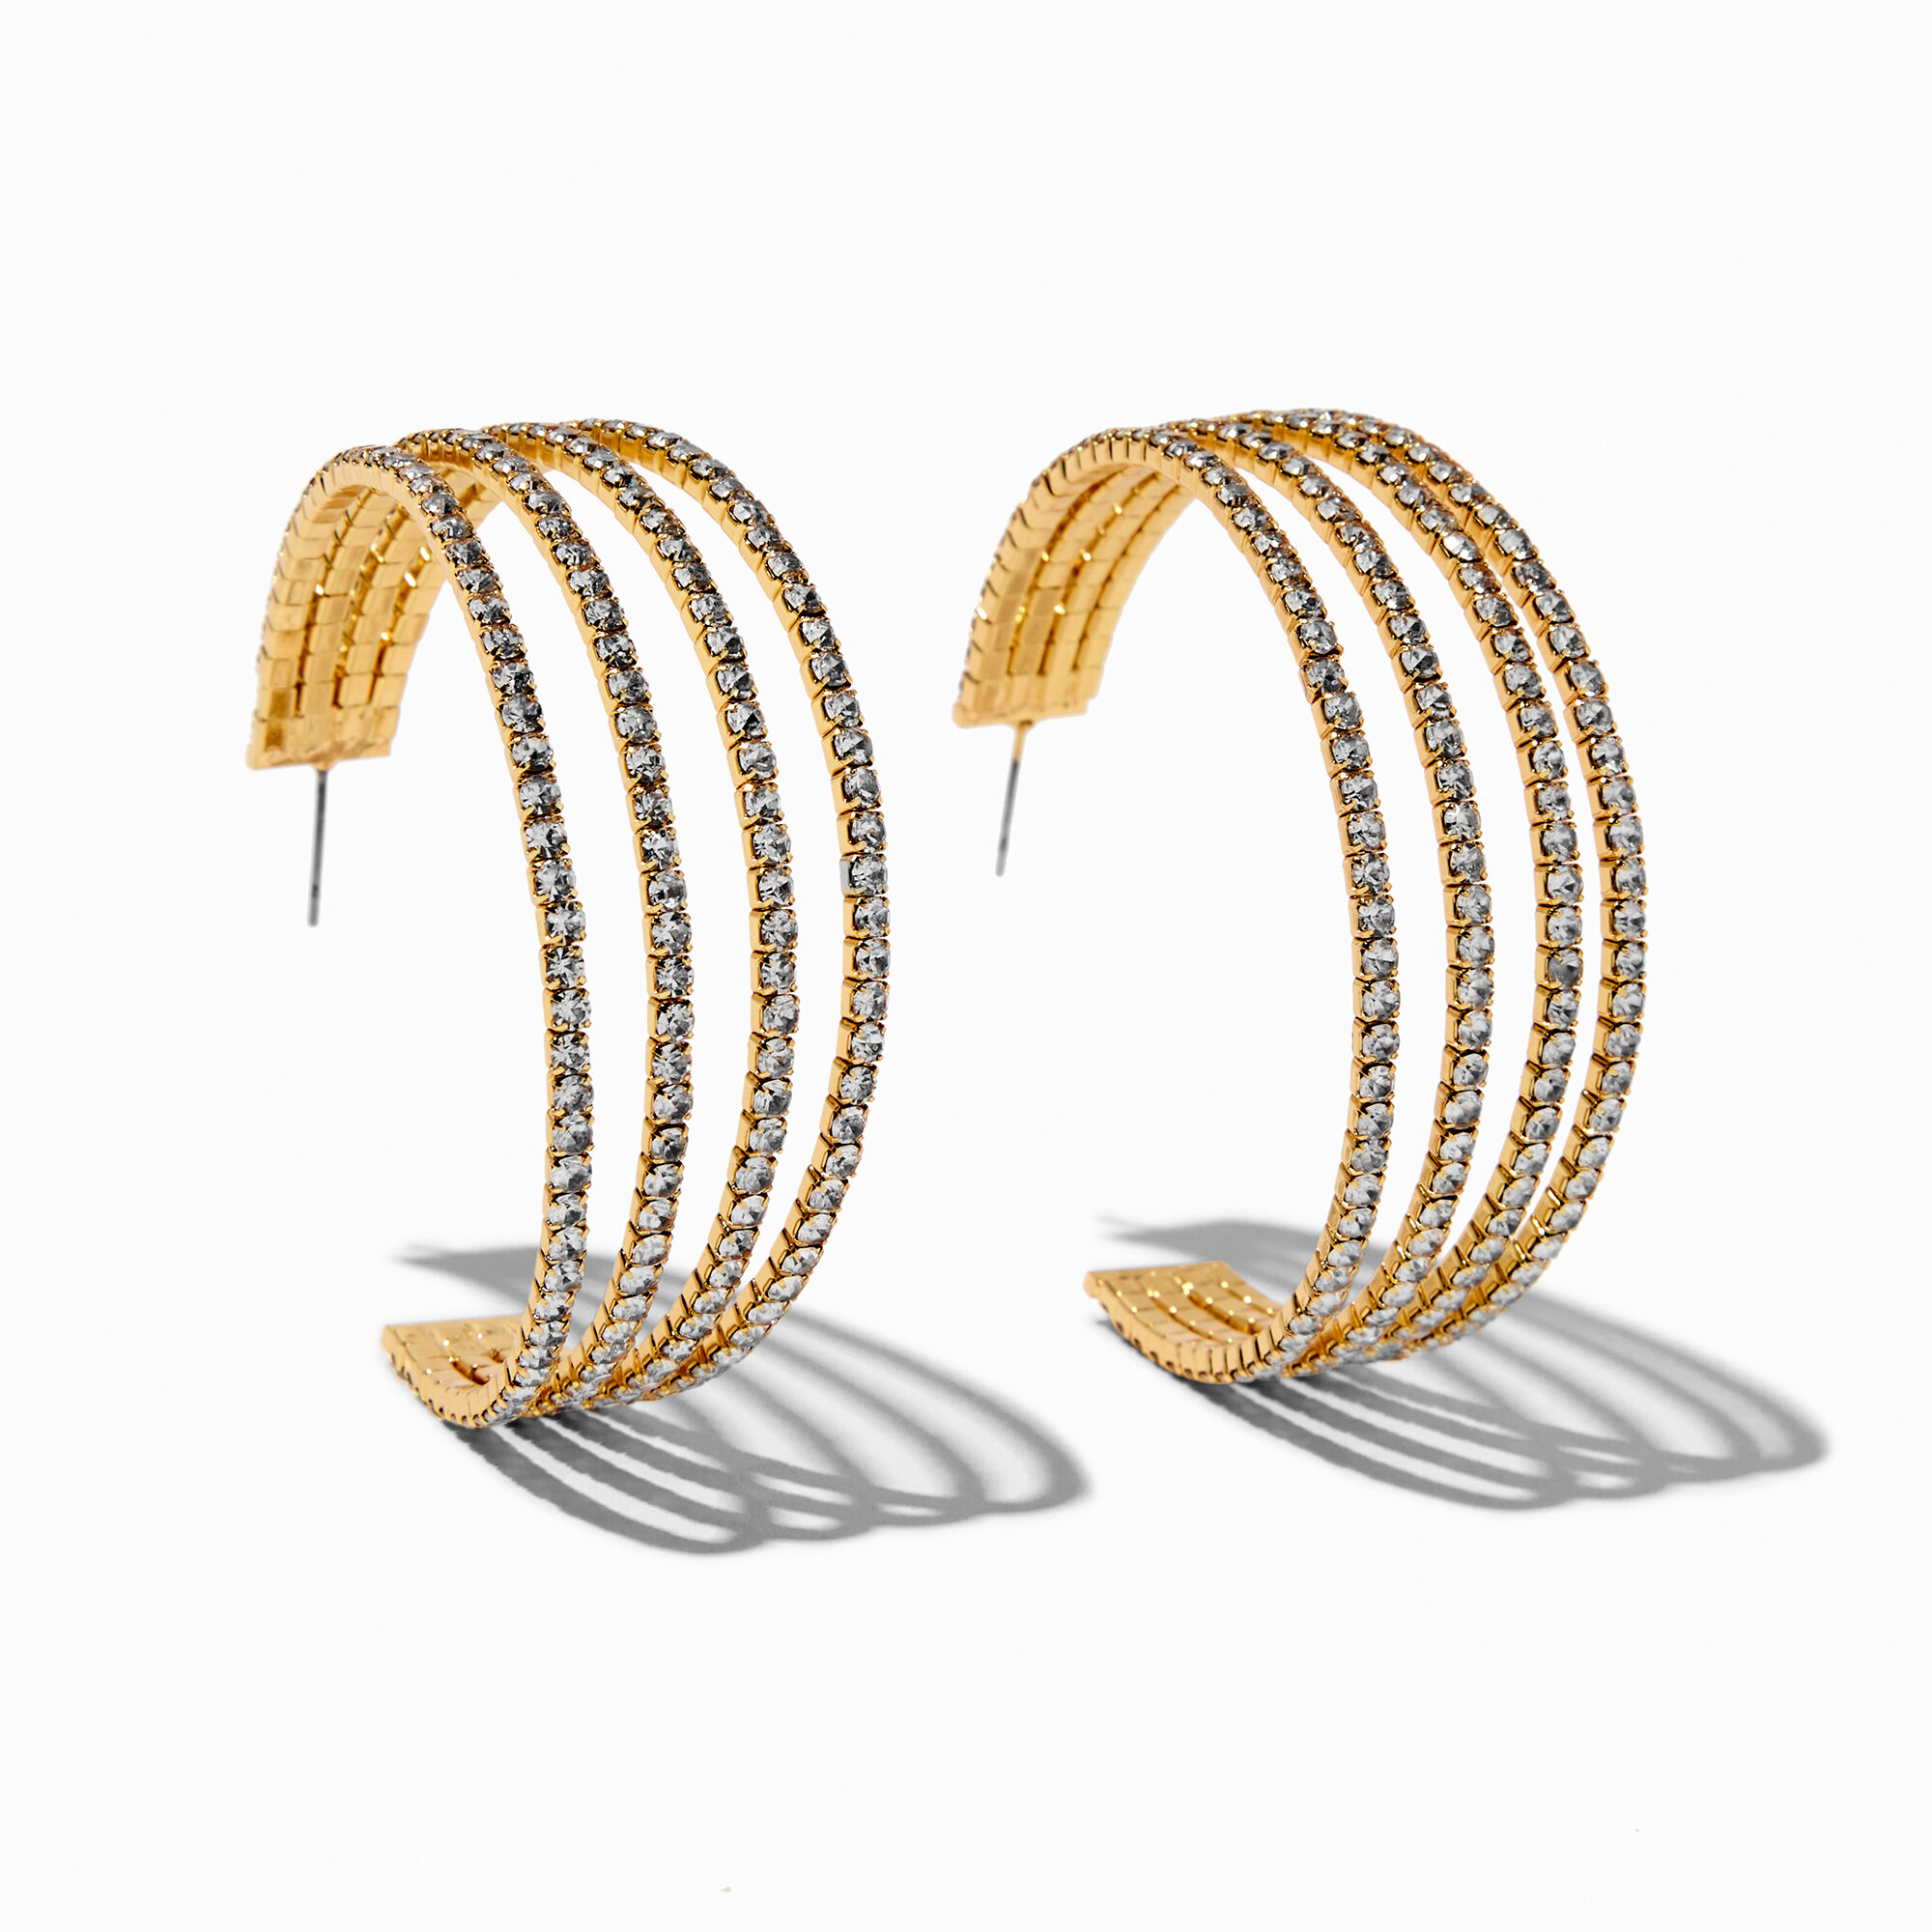 View Claires Tone Crystal MultiLayer 70MM Hoop Earrings Gold information